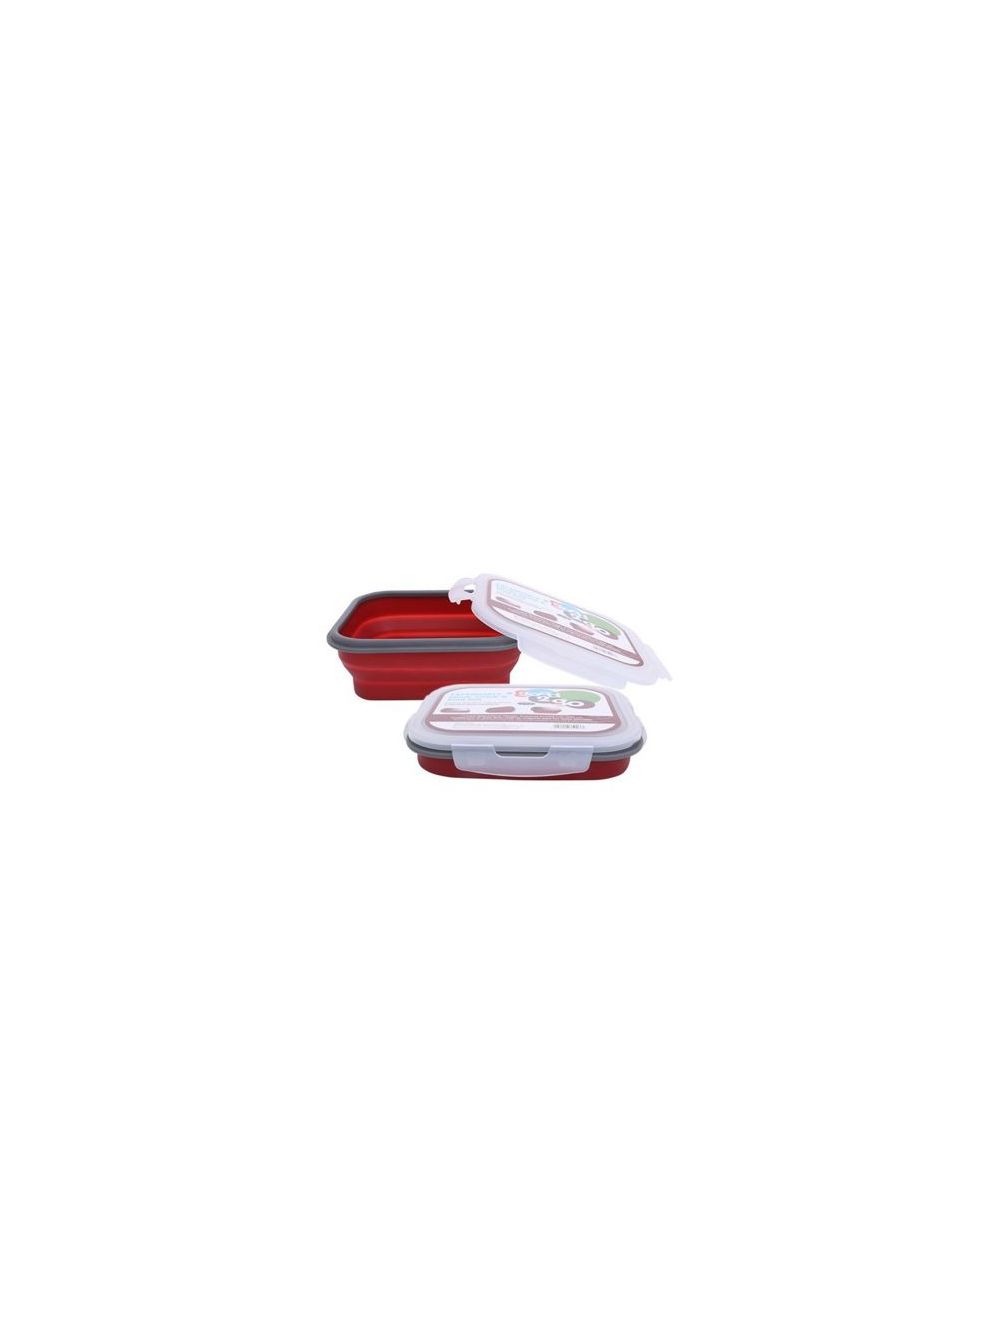 Good 2 Go Rectangle Container 1L - Red-G35003